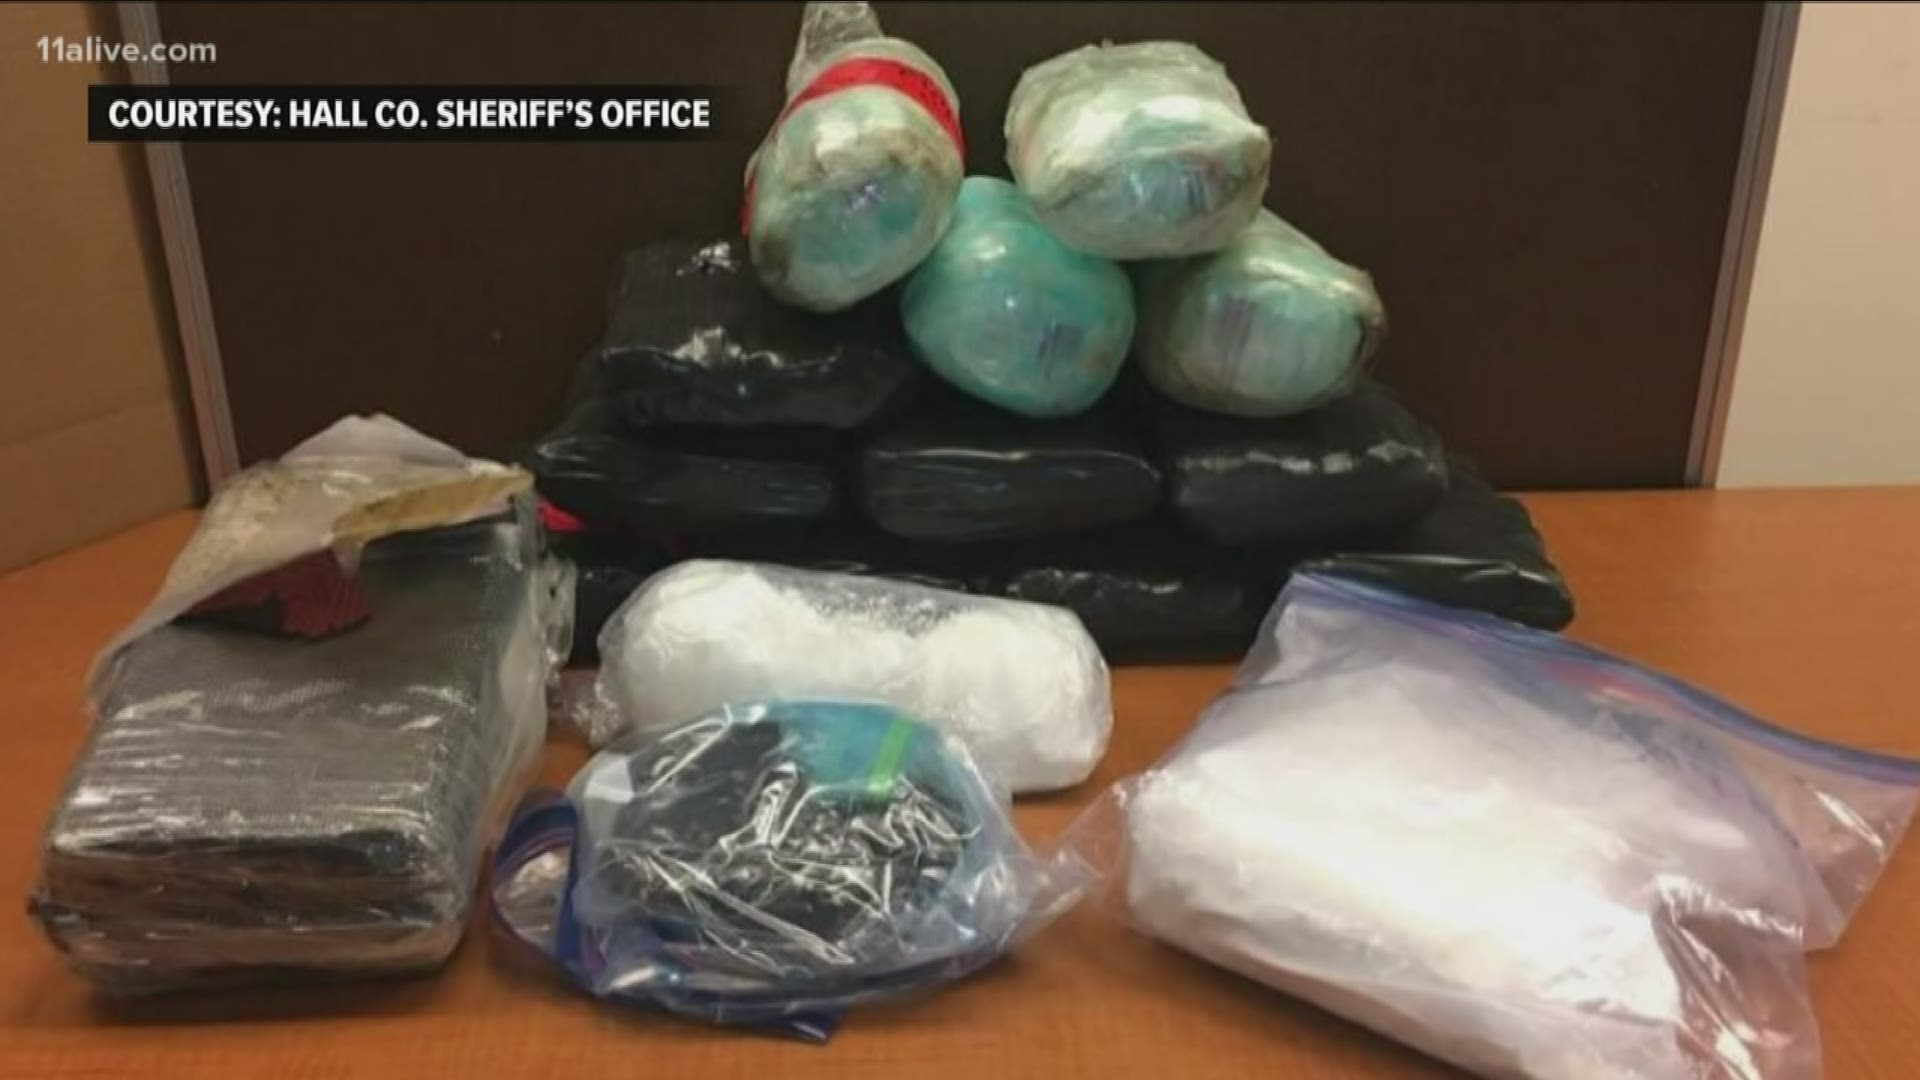 Several state, local and federal agencies teamed up to take a large drug sweep that ended with seven arrests.